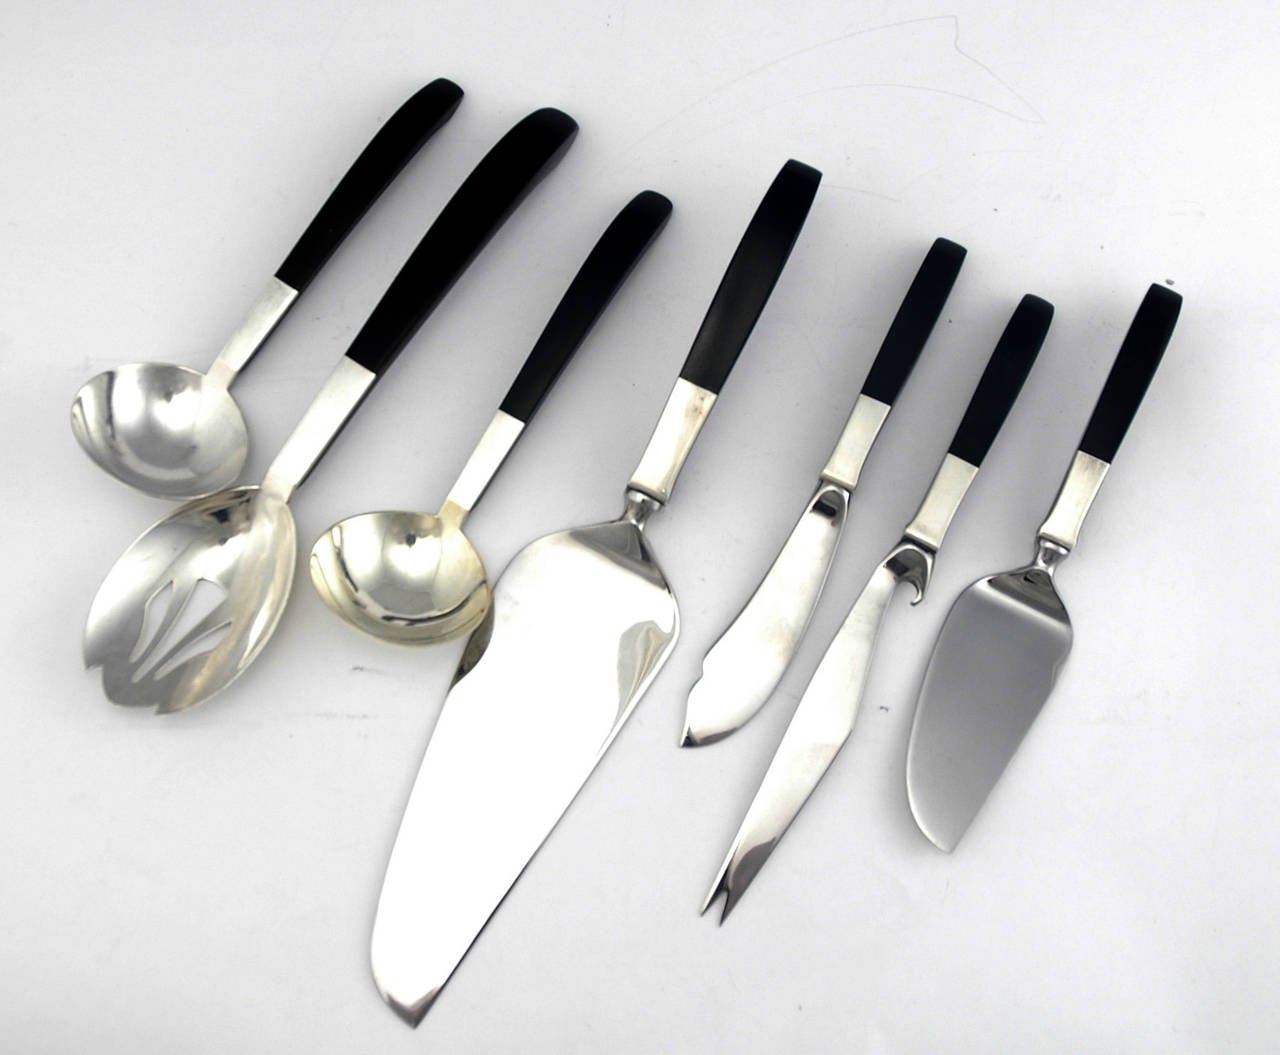 Being offered is a fine, circa 1956 sterling silver flatware set designed by Nord Bowlen for Lunt, of Greenfield, MA, using black nylon handles as a glorious counterpoint to sterling silver and emphasizing the combination of silver and plastics in